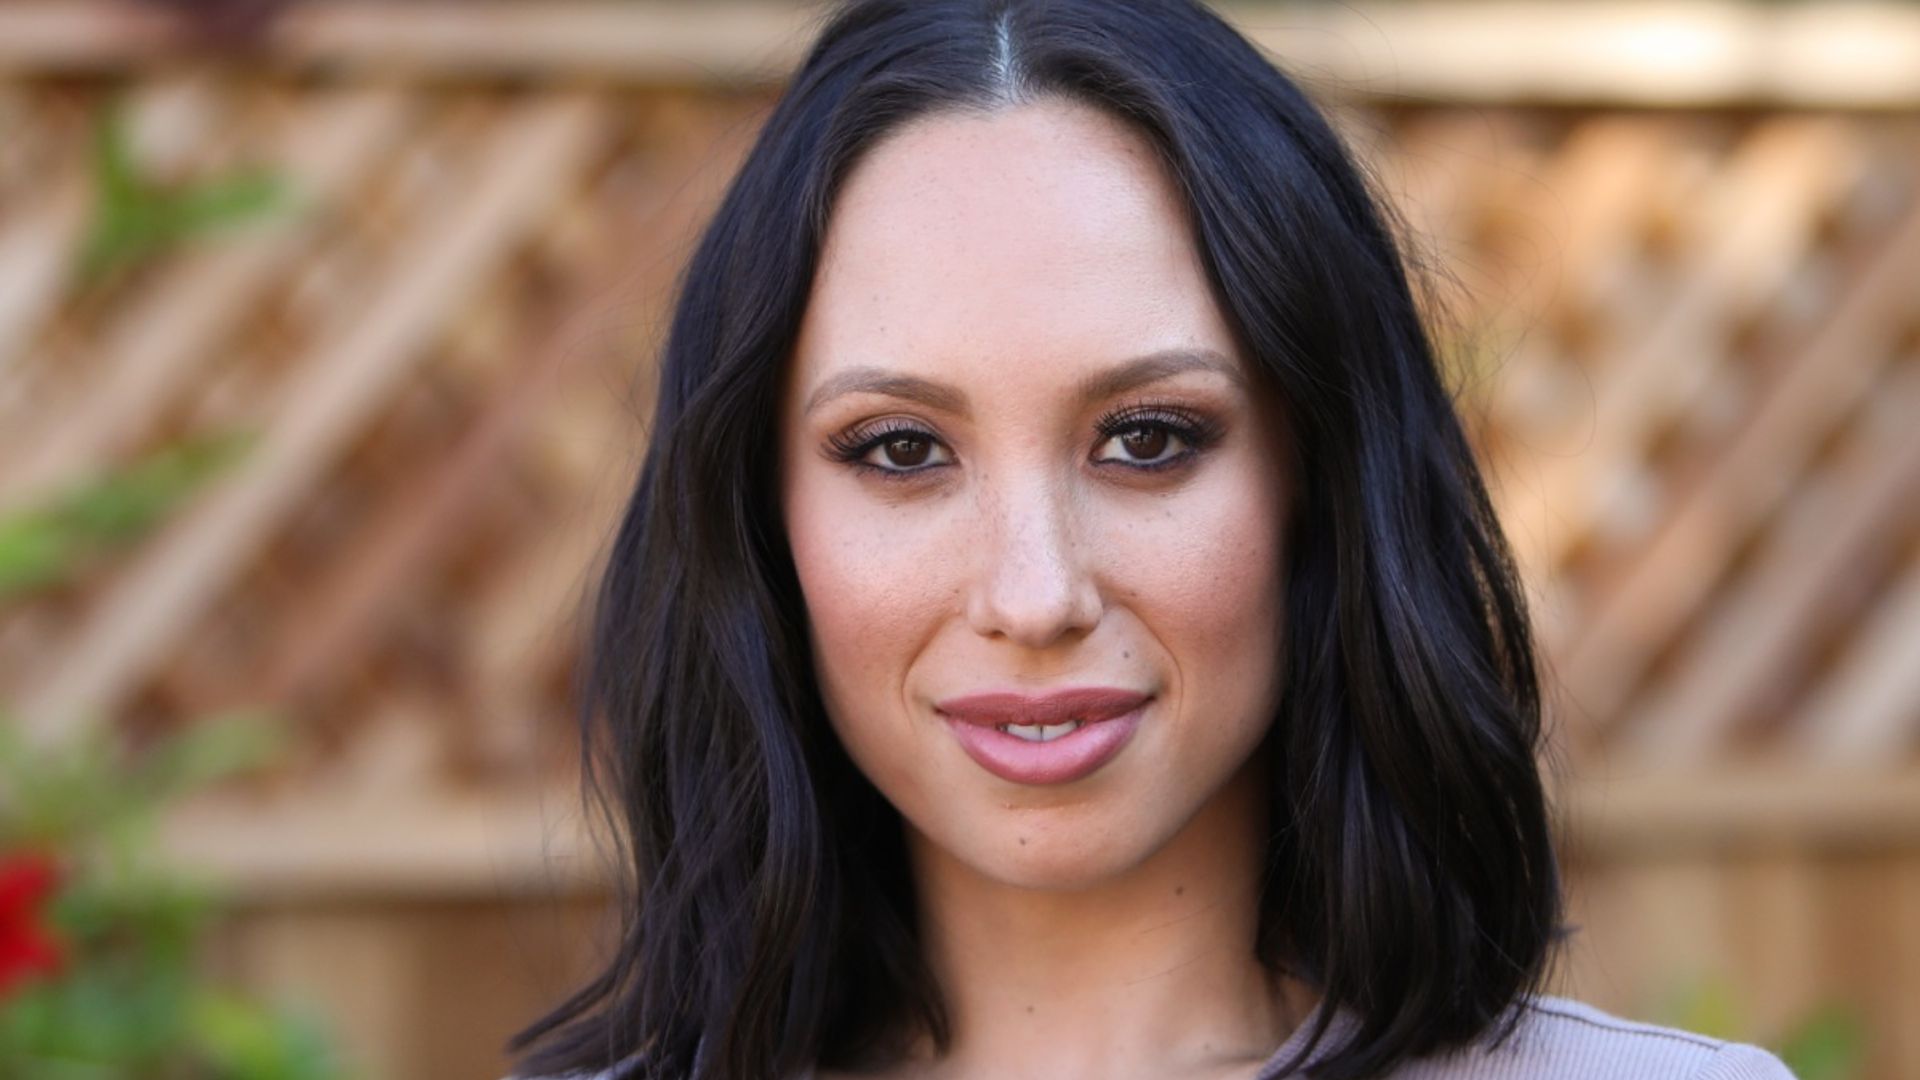 Exclusive: Cheryl Burke admits Dancing with the Stars could 'take a few notes' from Strictly Come Dancing